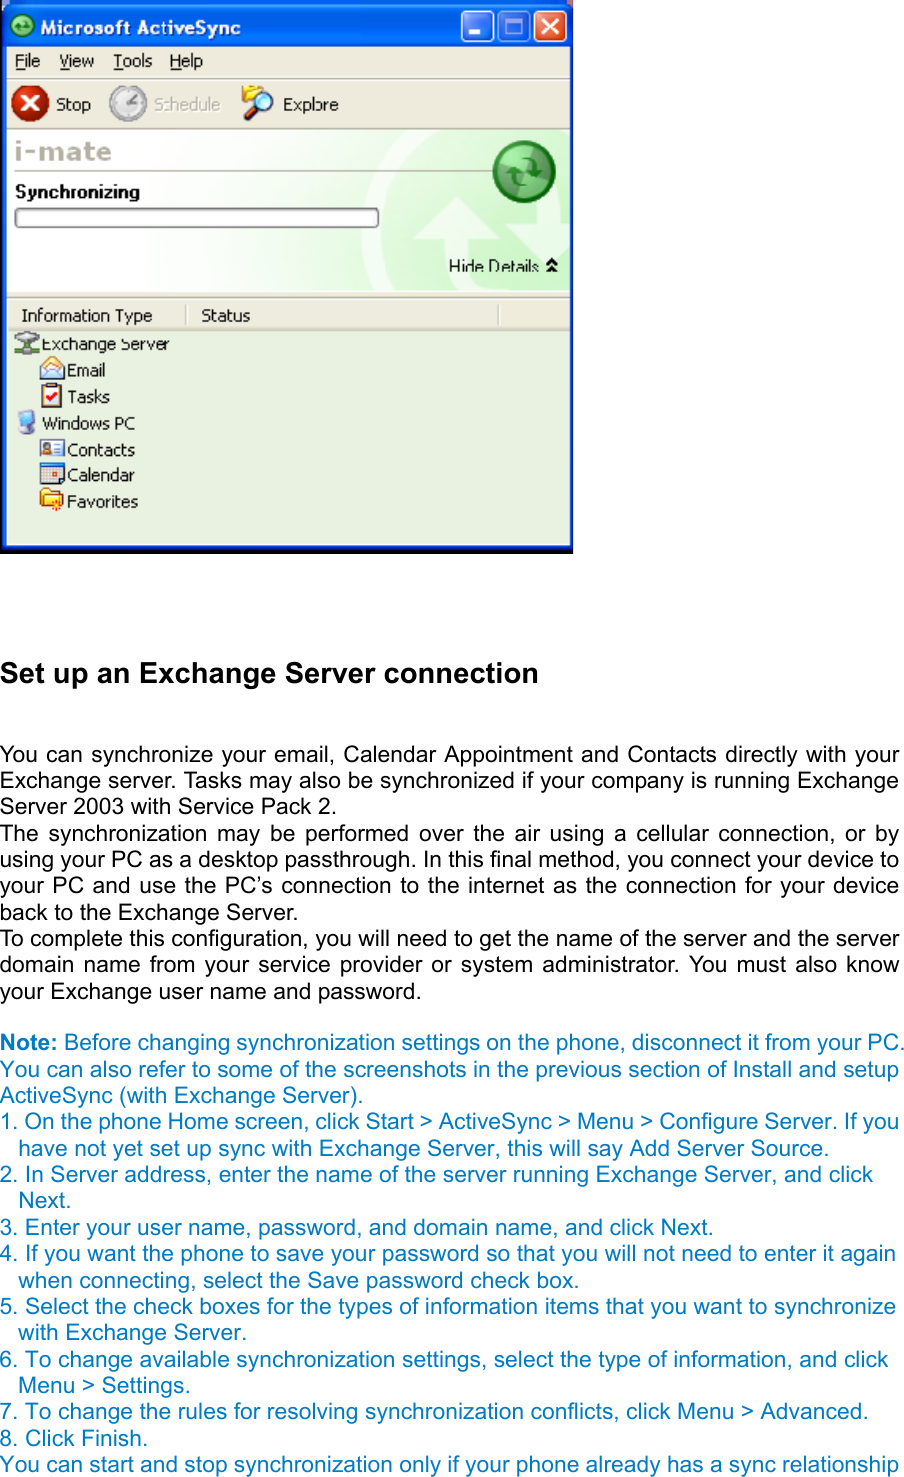     Set up an Exchange Server connection   You can synchronize your email, Calendar Appointment and Contacts directly with your Exchange server. Tasks may also be synchronized if your company is running Exchange Server 2003 with Service Pack 2.   The synchronization may be performed over the air using a cellular connection, or by using your PC as a desktop passthrough. In this final method, you connect your device to your PC and use the PC’s connection to the internet as the connection for your device back to the Exchange Server.   To complete this configuration, you will need to get the name of the server and the server domain name from your service provider or system administrator. You must also know your Exchange user name and password.  Note: Before changing synchronization settings on the phone, disconnect it from your PC. You can also refer to some of the screenshots in the previous section of Install and setup ActiveSync (with Exchange Server).   1. On the phone Home screen, click Start &gt; ActiveSync &gt; Menu &gt; Configure Server. If you have not yet set up sync with Exchange Server, this will say Add Server Source.   2. In Server address, enter the name of the server running Exchange Server, and click Next.  3. Enter your user name, password, and domain name, and click Next.   4. If you want the phone to save your password so that you will not need to enter it again when connecting, select the Save password check box.   5. Select the check boxes for the types of information items that you want to synchronize with Exchange Server.   6. To change available synchronization settings, select the type of information, and click Menu &gt; Settings.   7. To change the rules for resolving synchronization conflicts, click Menu &gt; Advanced.   8. Click Finish.   You can start and stop synchronization only if your phone already has a sync relationship 